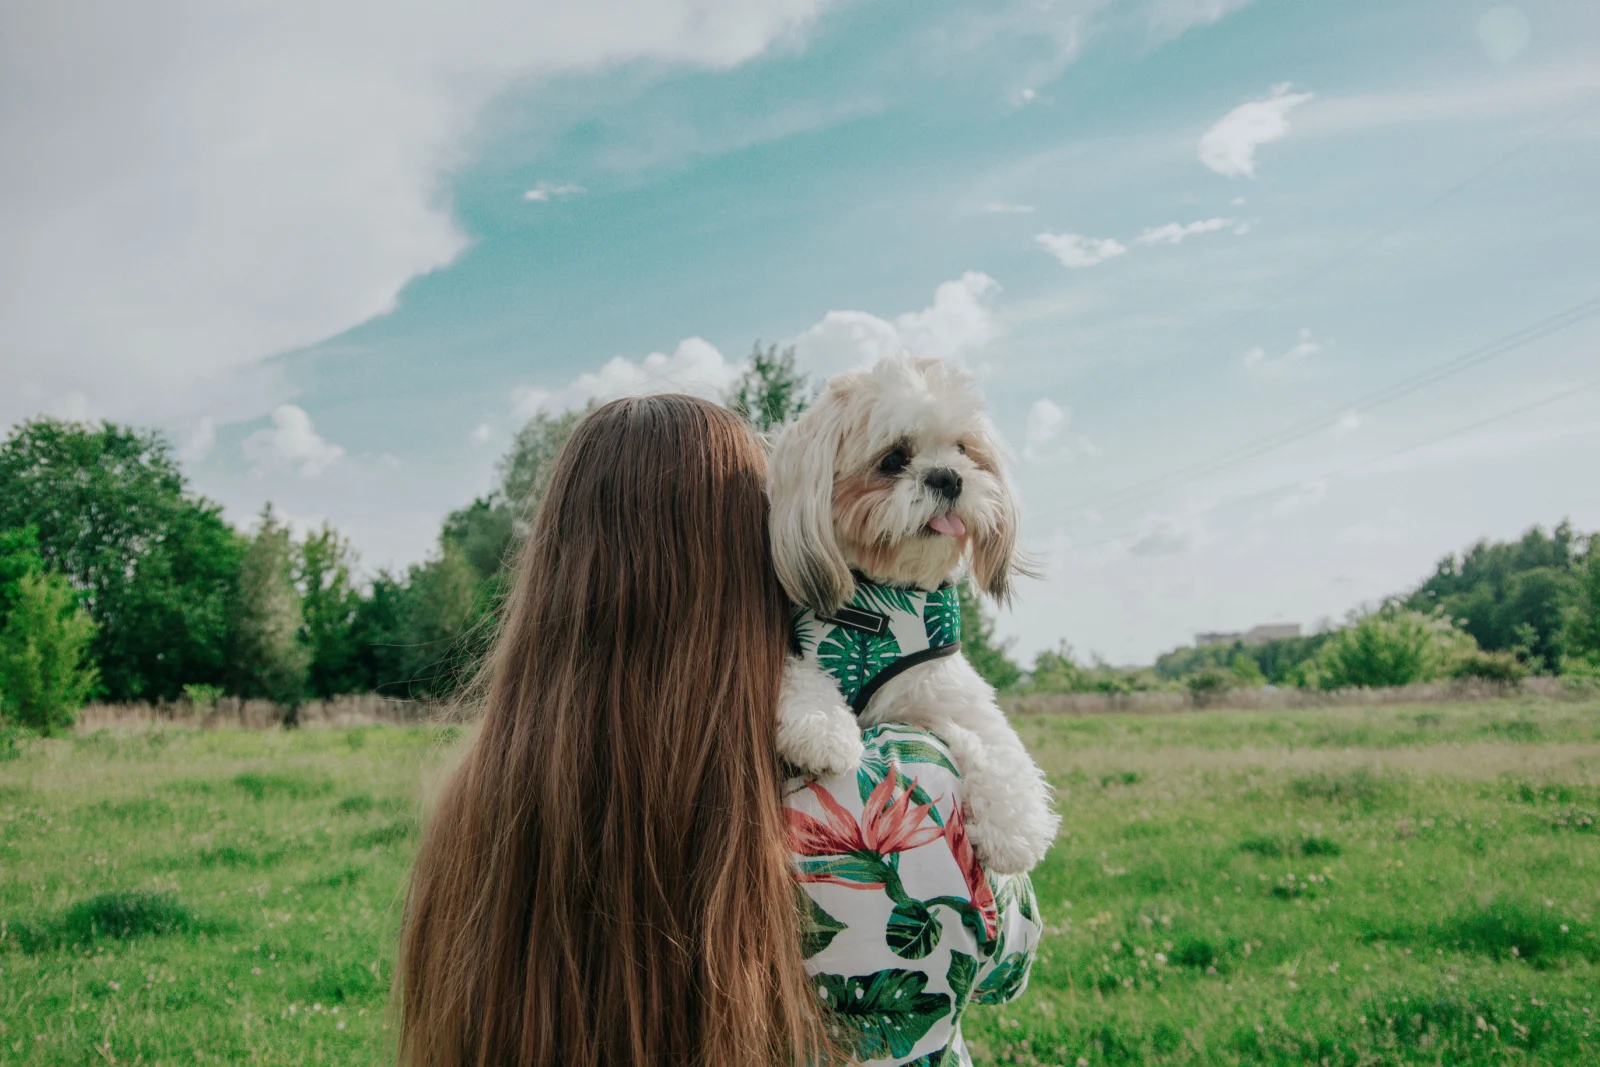 A girl with long hair carrying little dog shih tzu in her arms